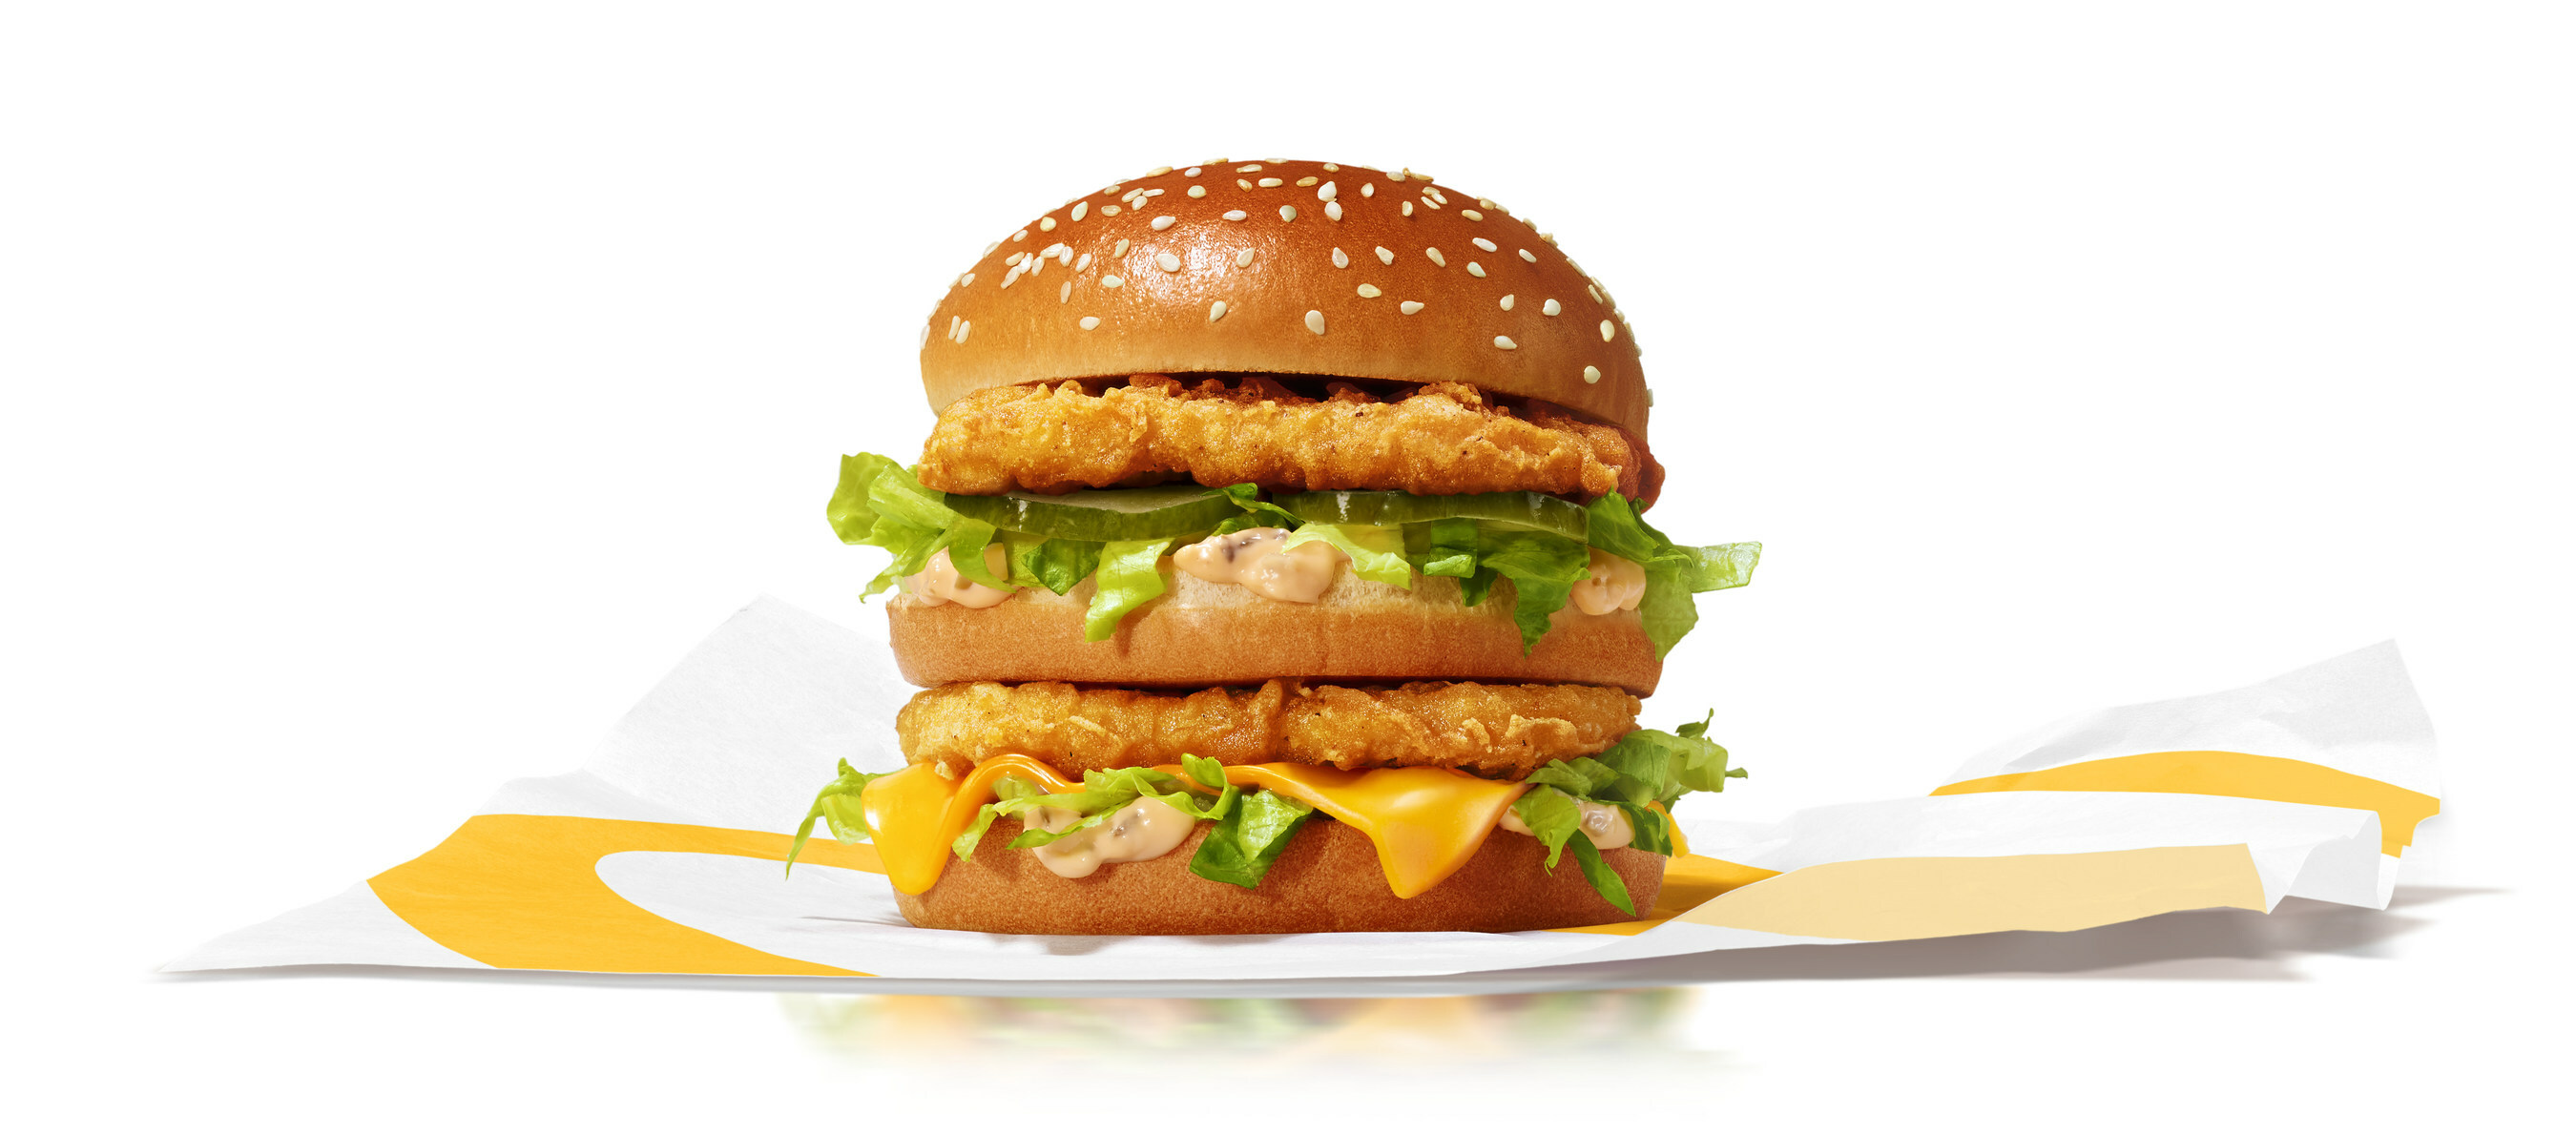 McDonald’s Canada's newest limited-time offering is the Chicken Big Mac. - CNW Group / McDonald's Canada